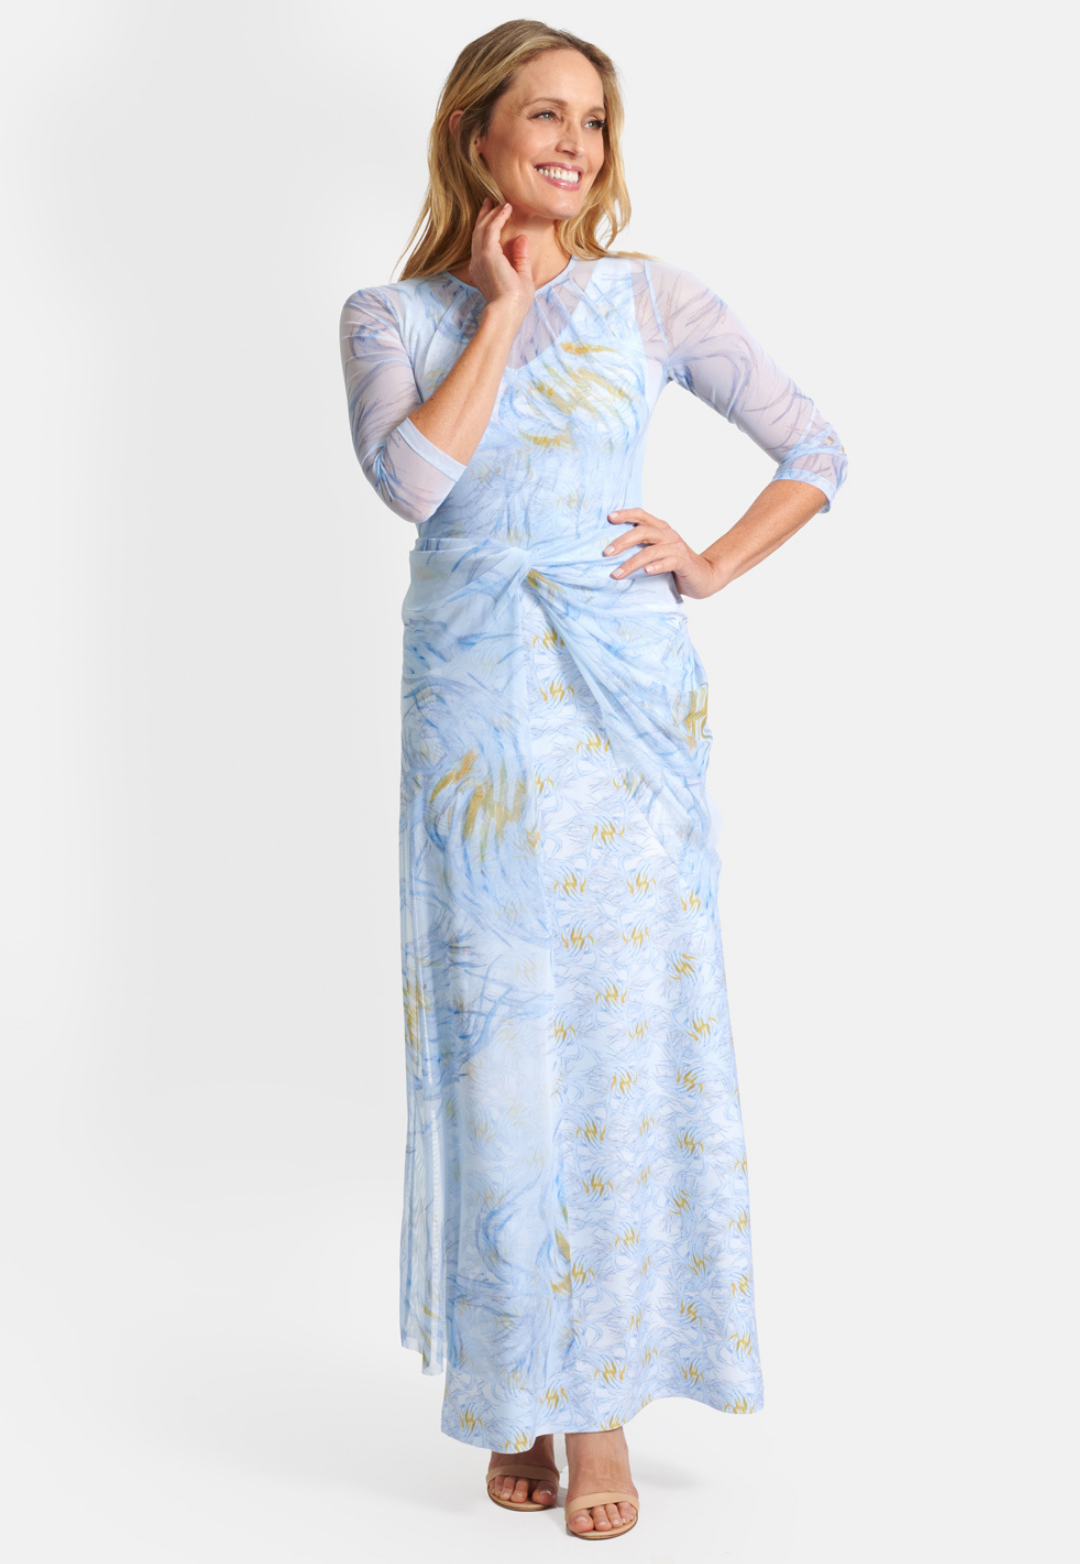 Woman wearing blue and yellow feather printed stretch knit long dress with mesh topper by Ala von Auersperg